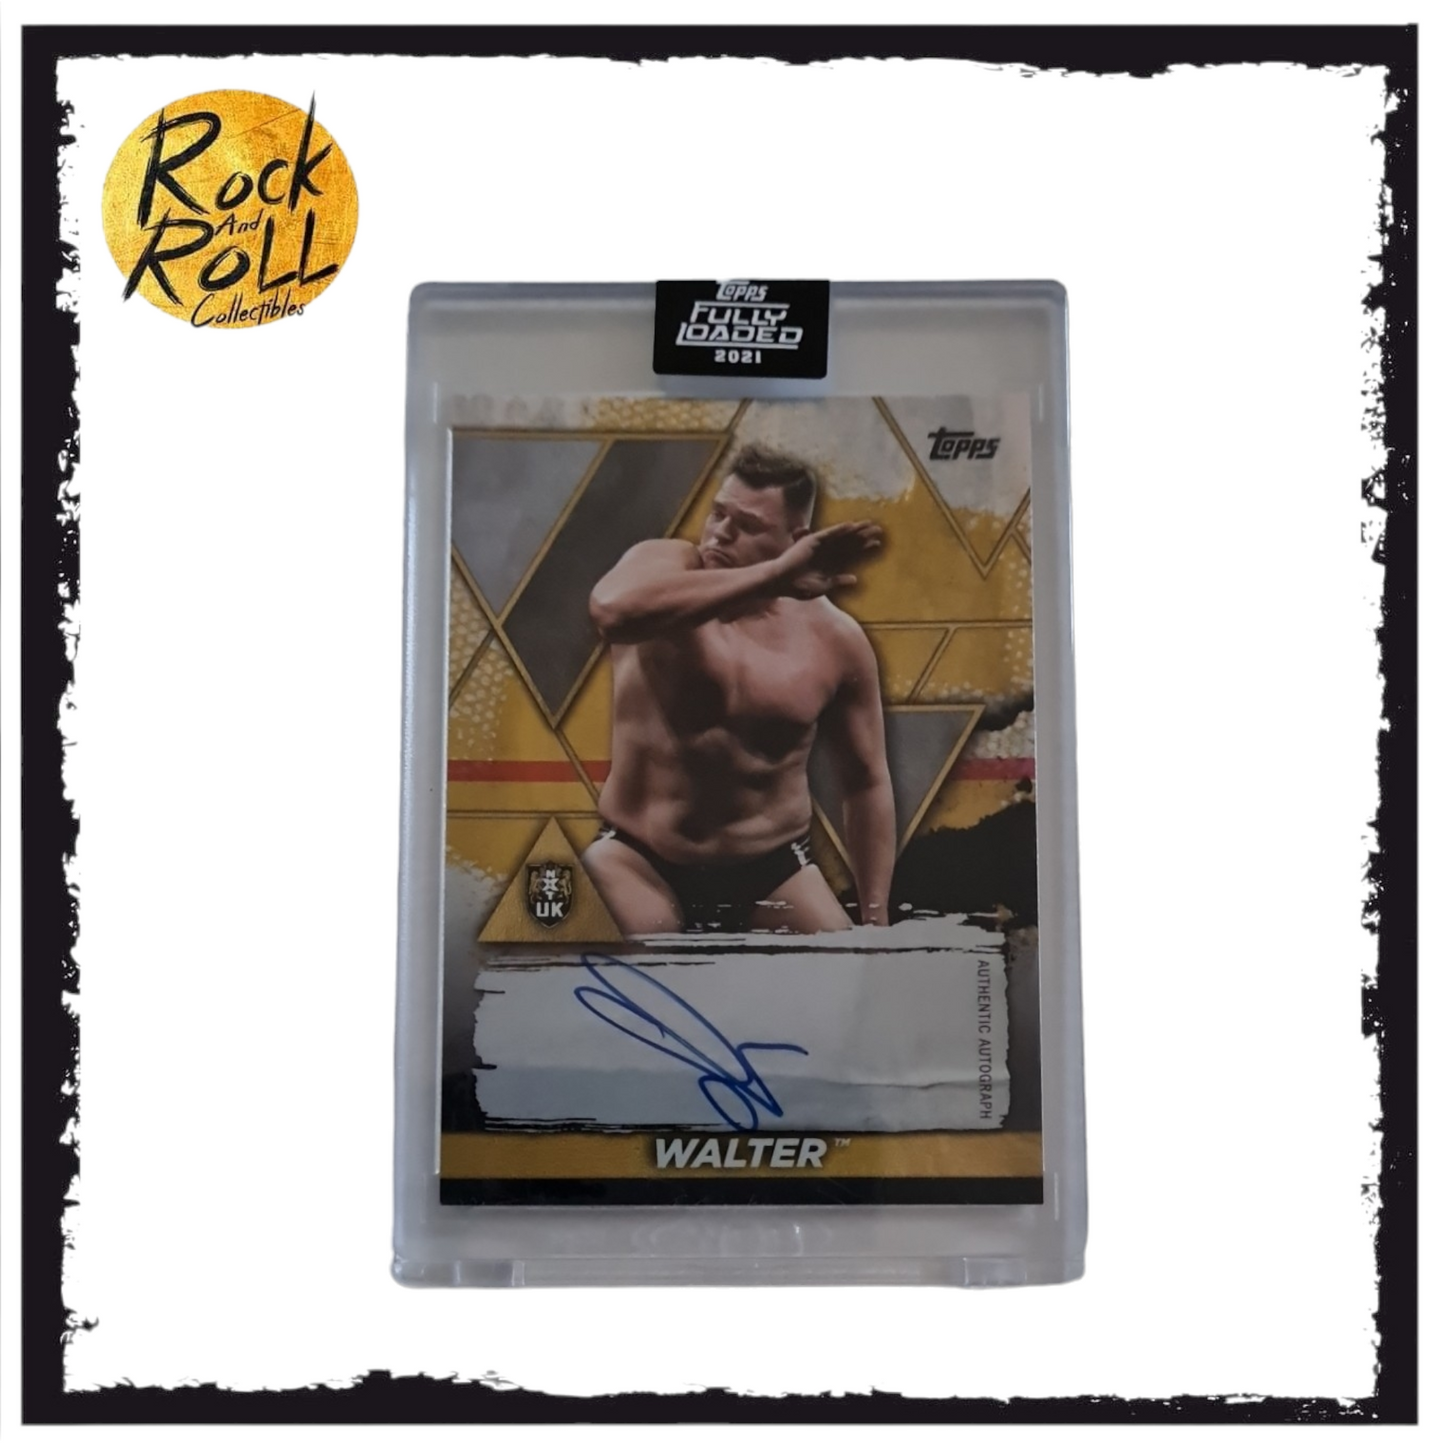 WWE nXt 2021 Topps Fully Loaded Walter (Gunther) Future Stars Autograph Card S-W #29/99